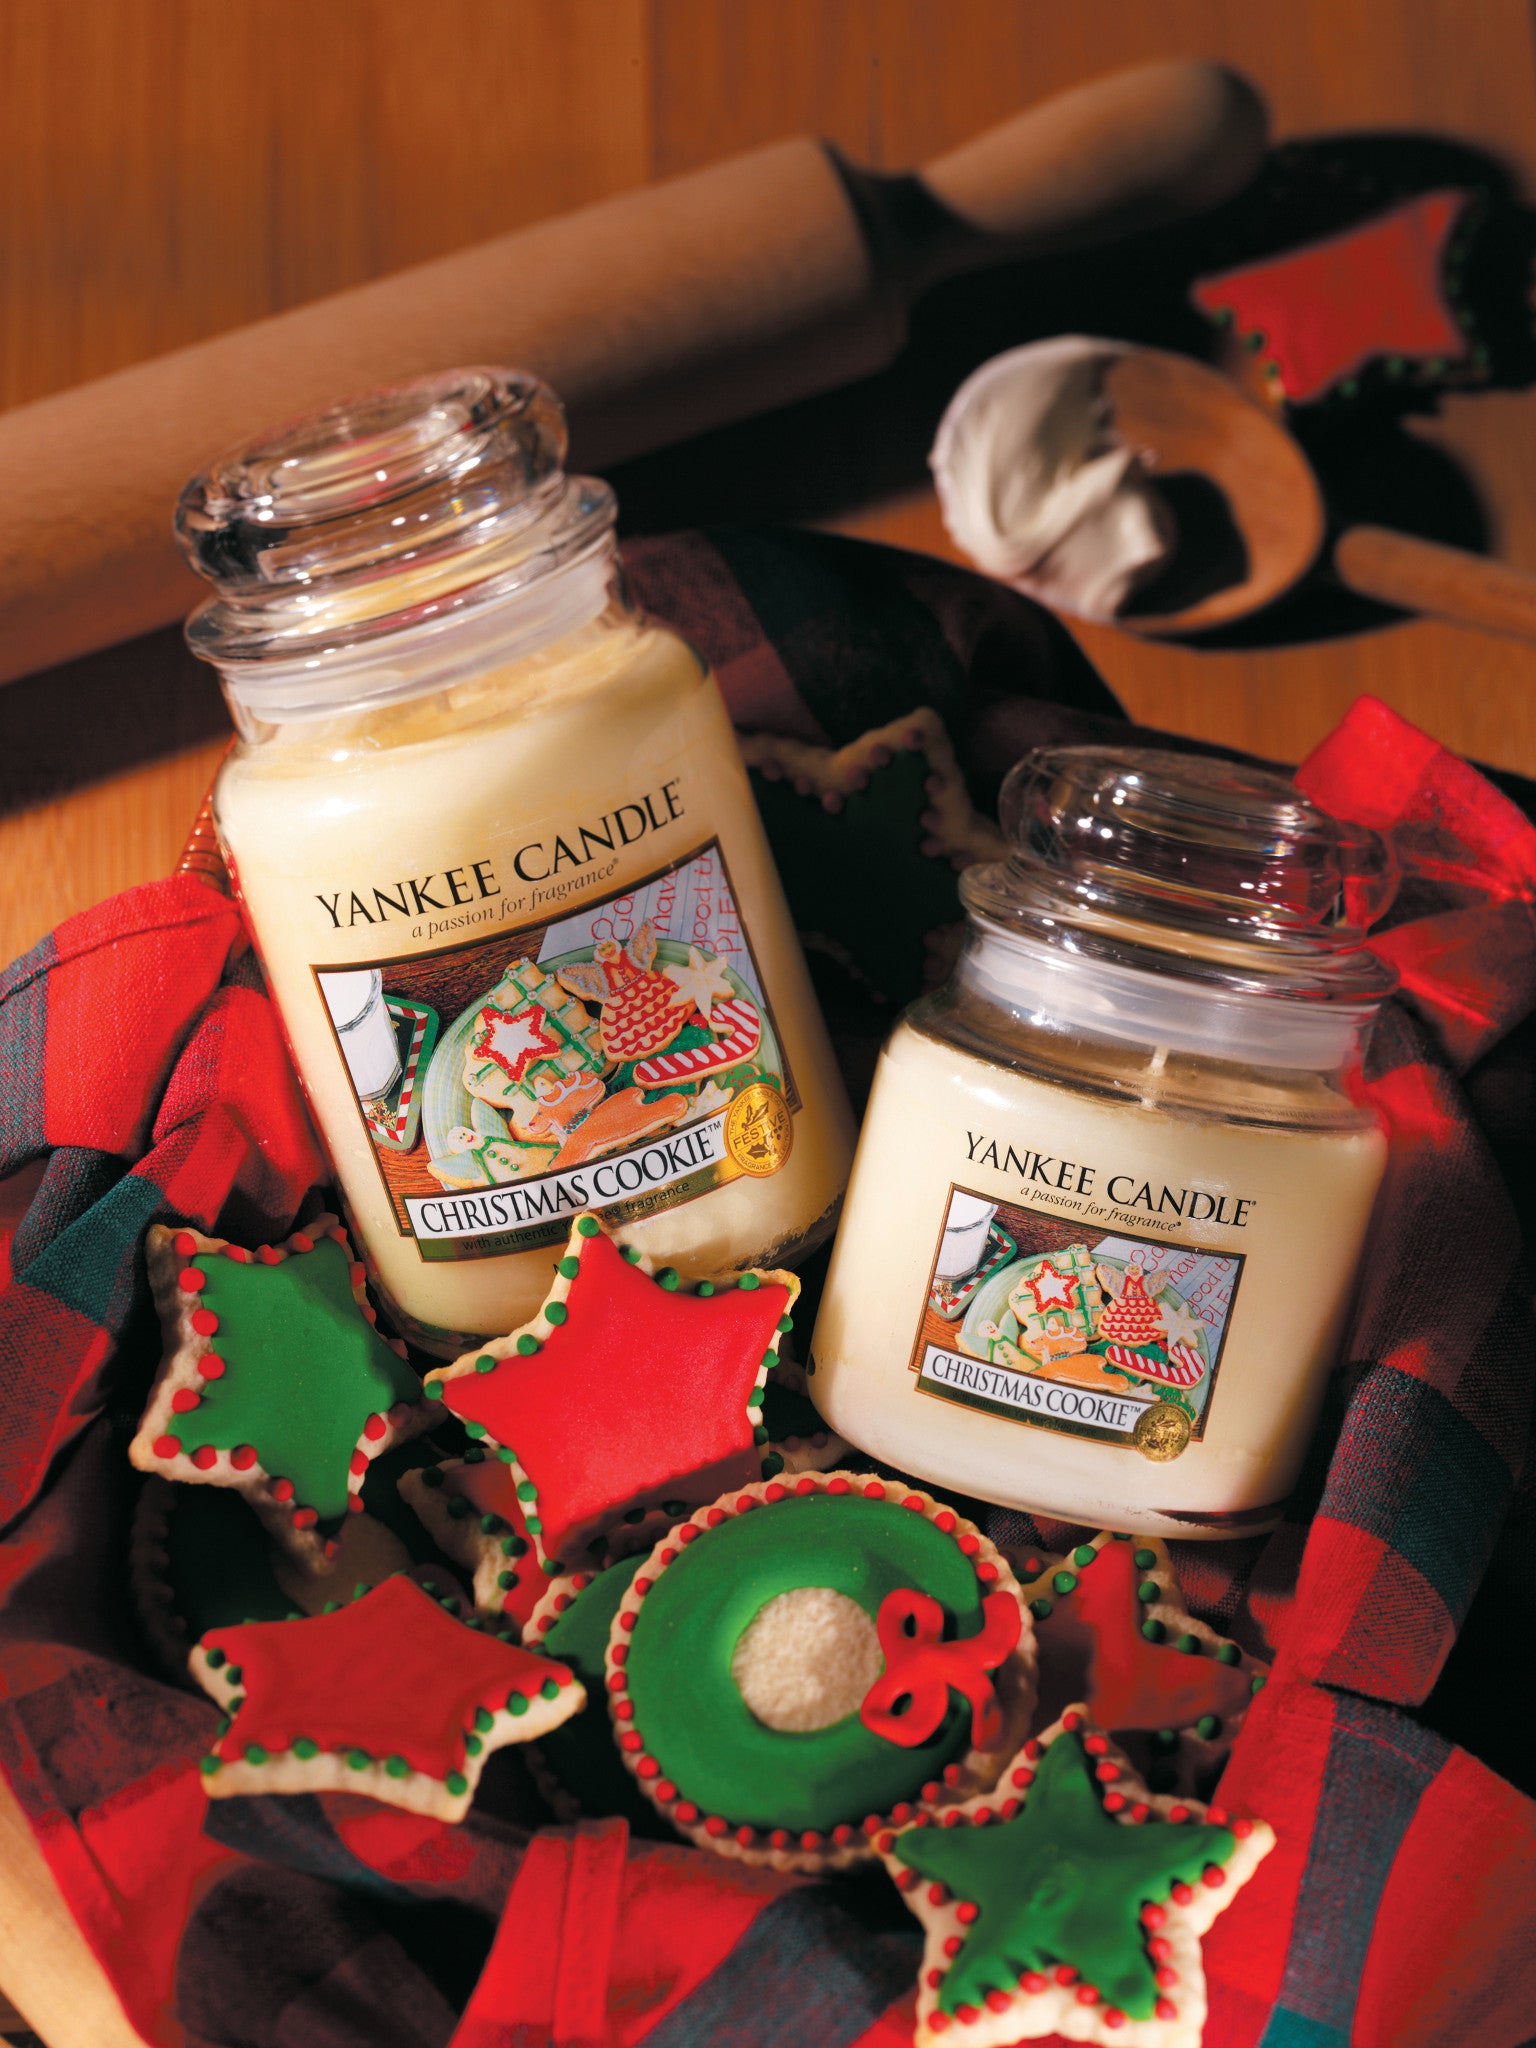 CHRISTMAS COOKIE -Yankee Candle- Candela Sampler – Candle With Care